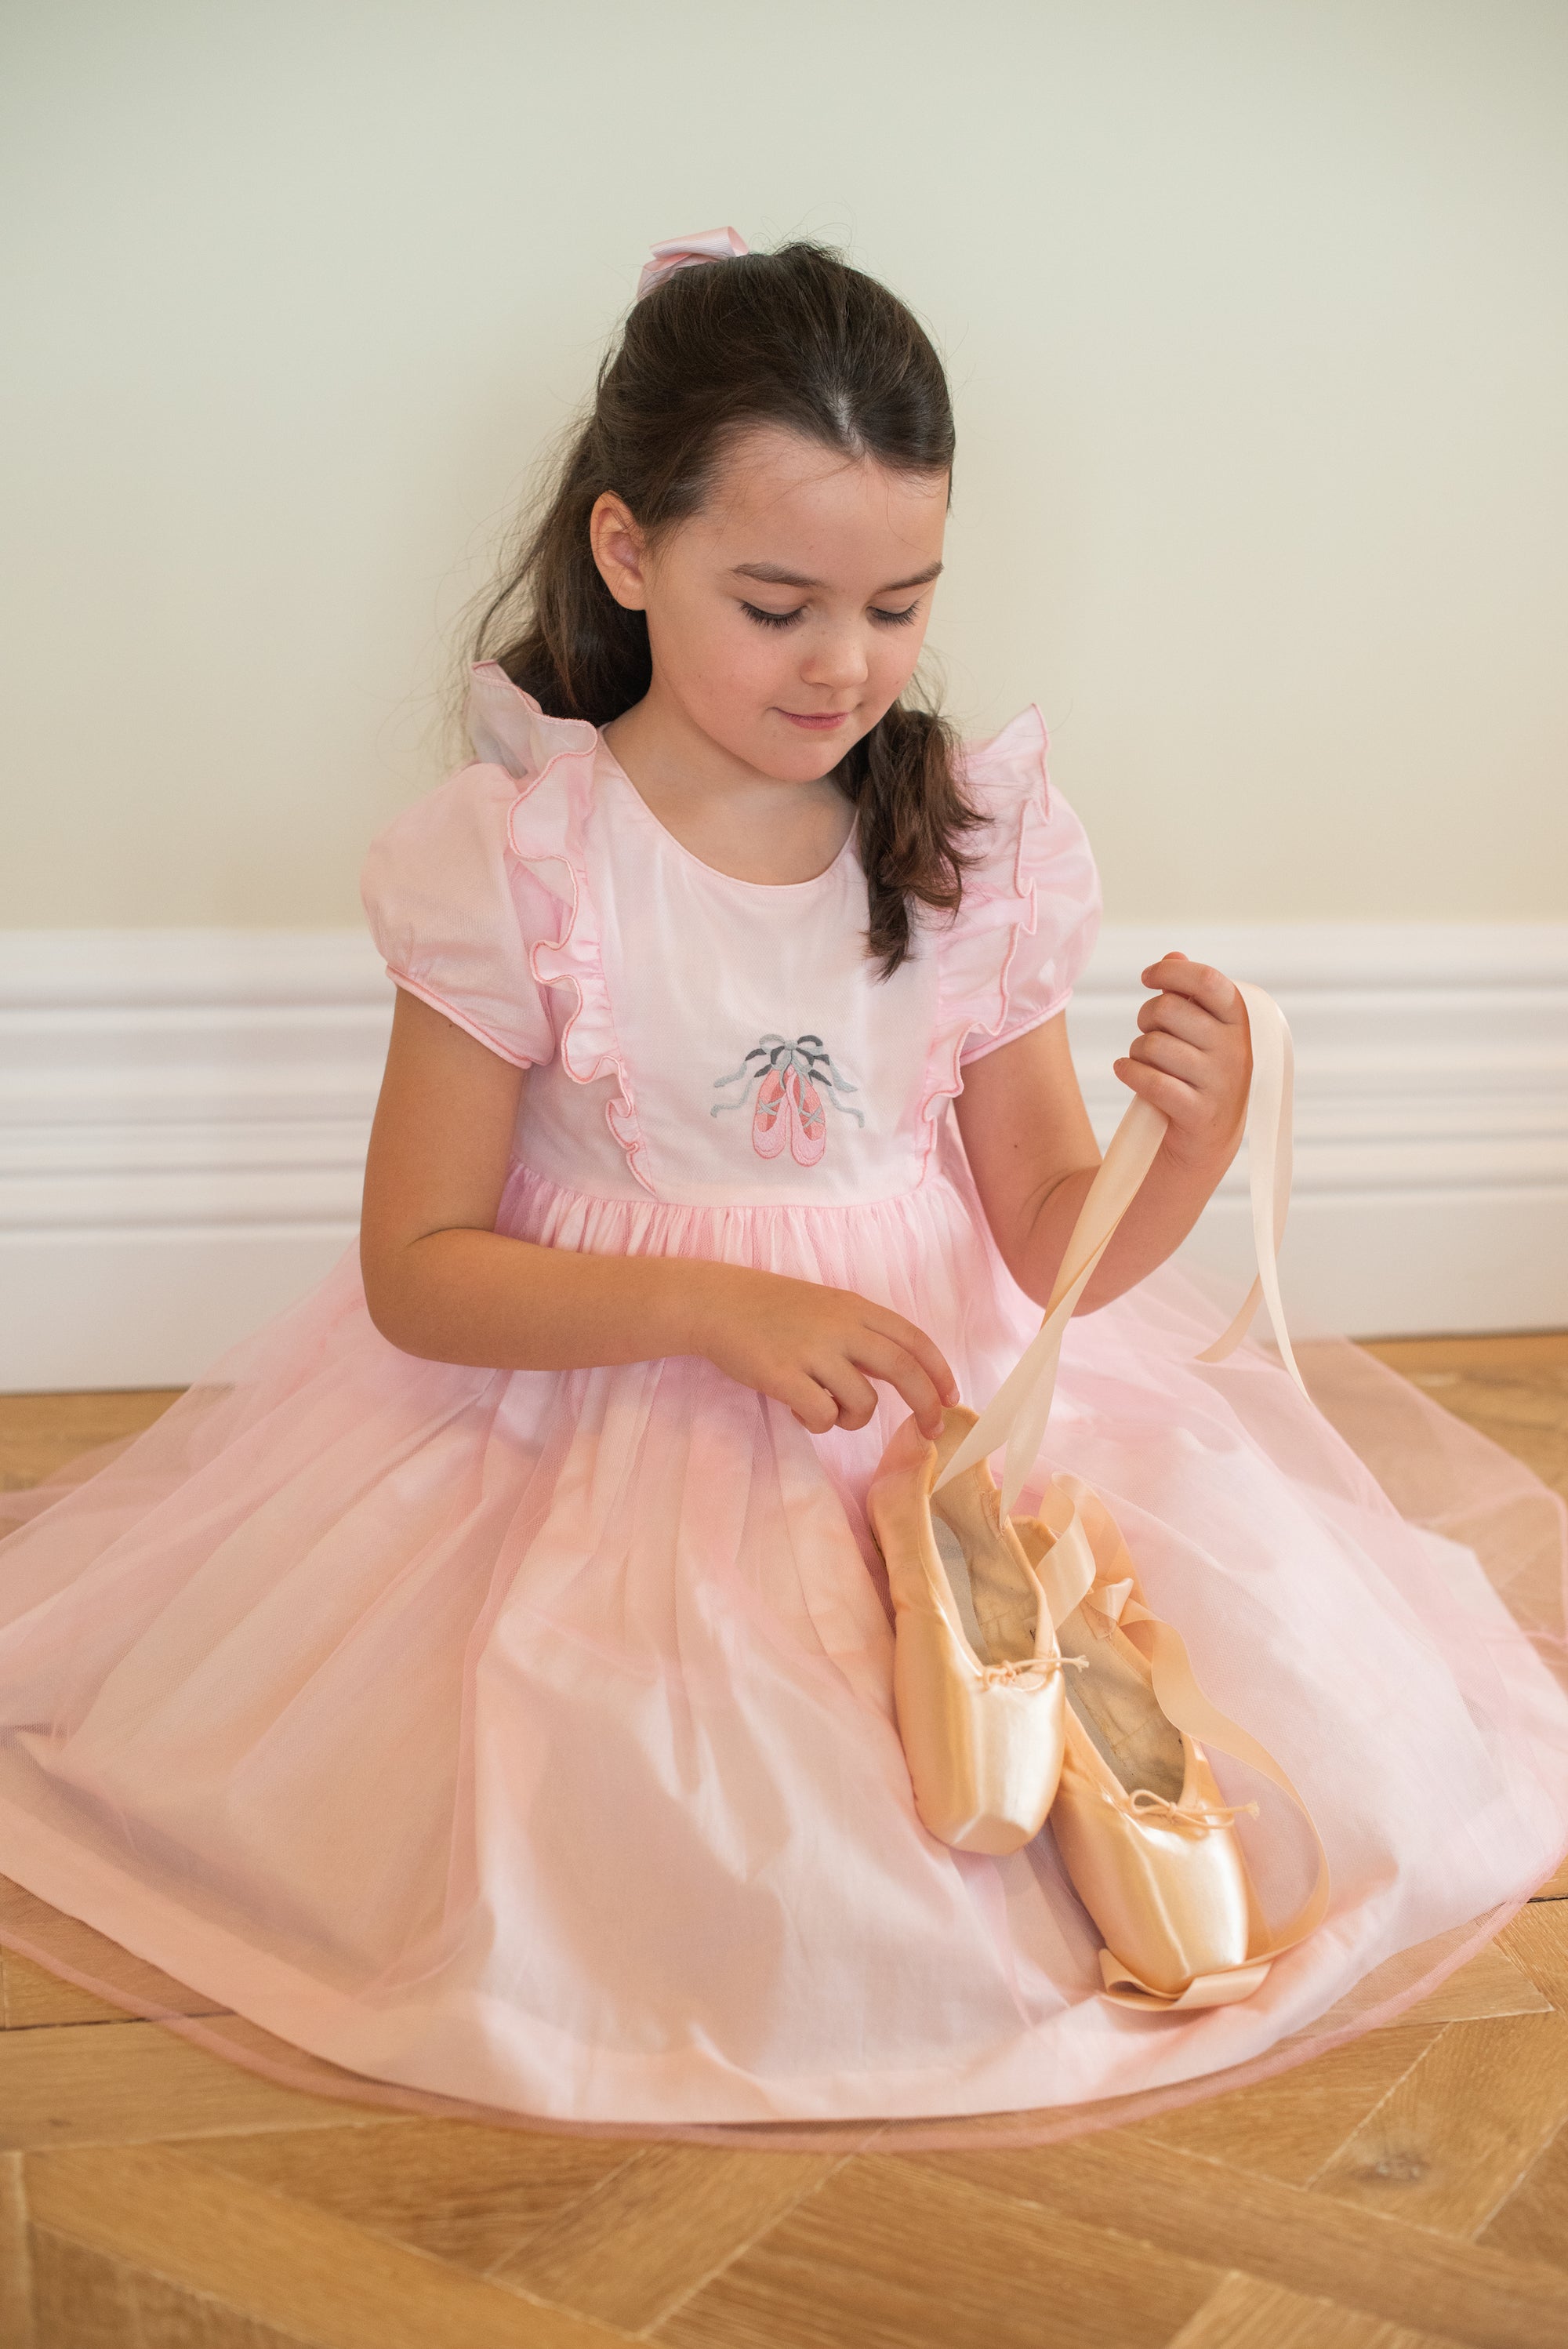 Ballet dance inspiration captions and quotes